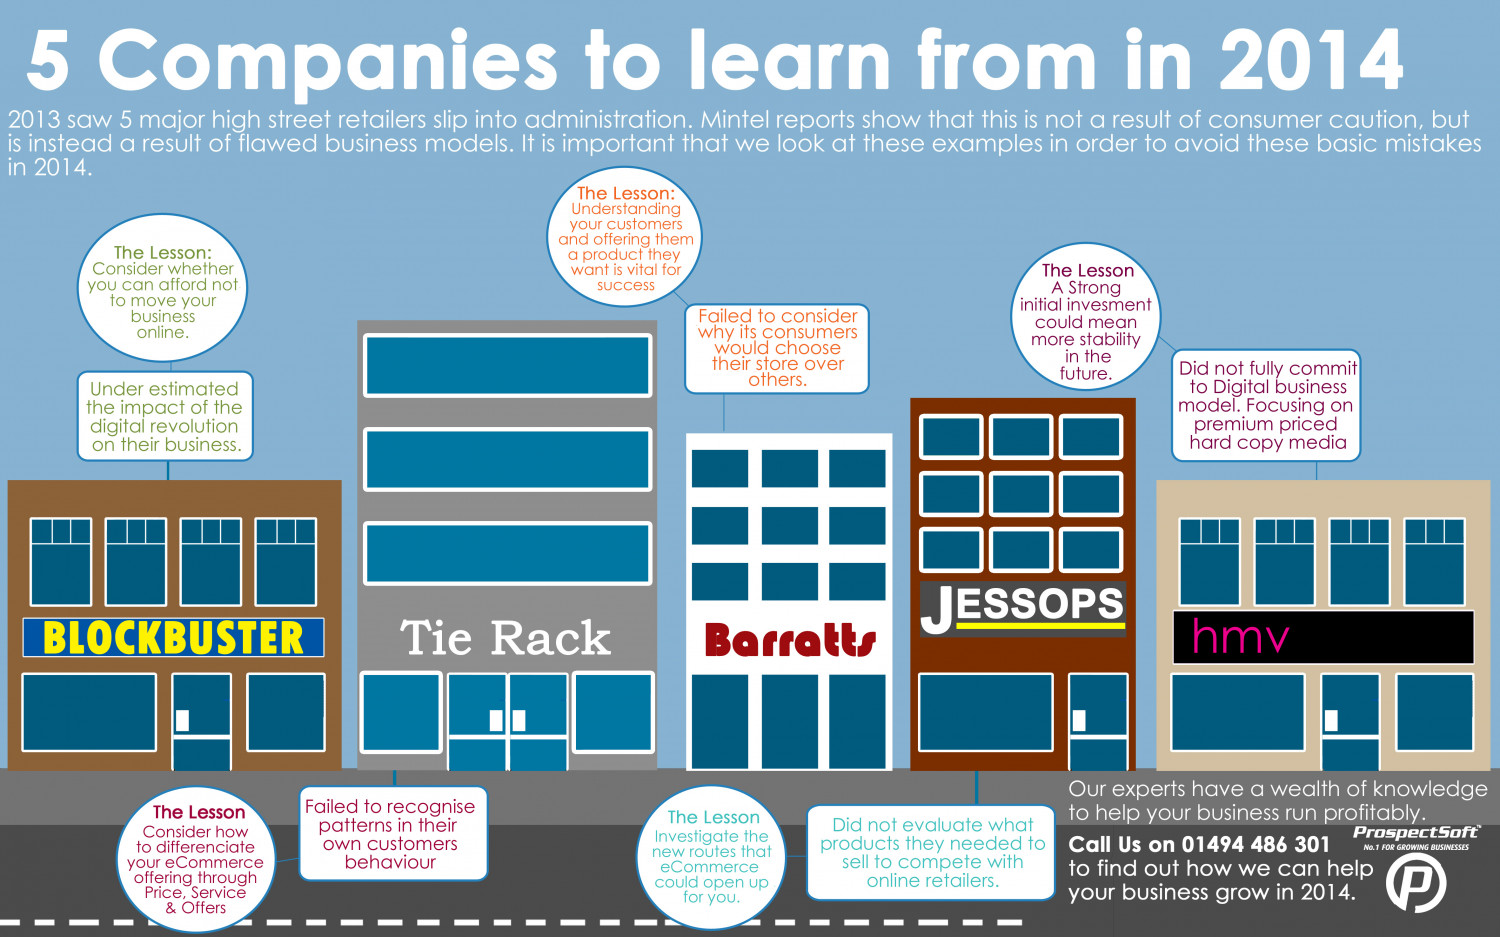 5 Companies to Learn From in 2014 Infographic